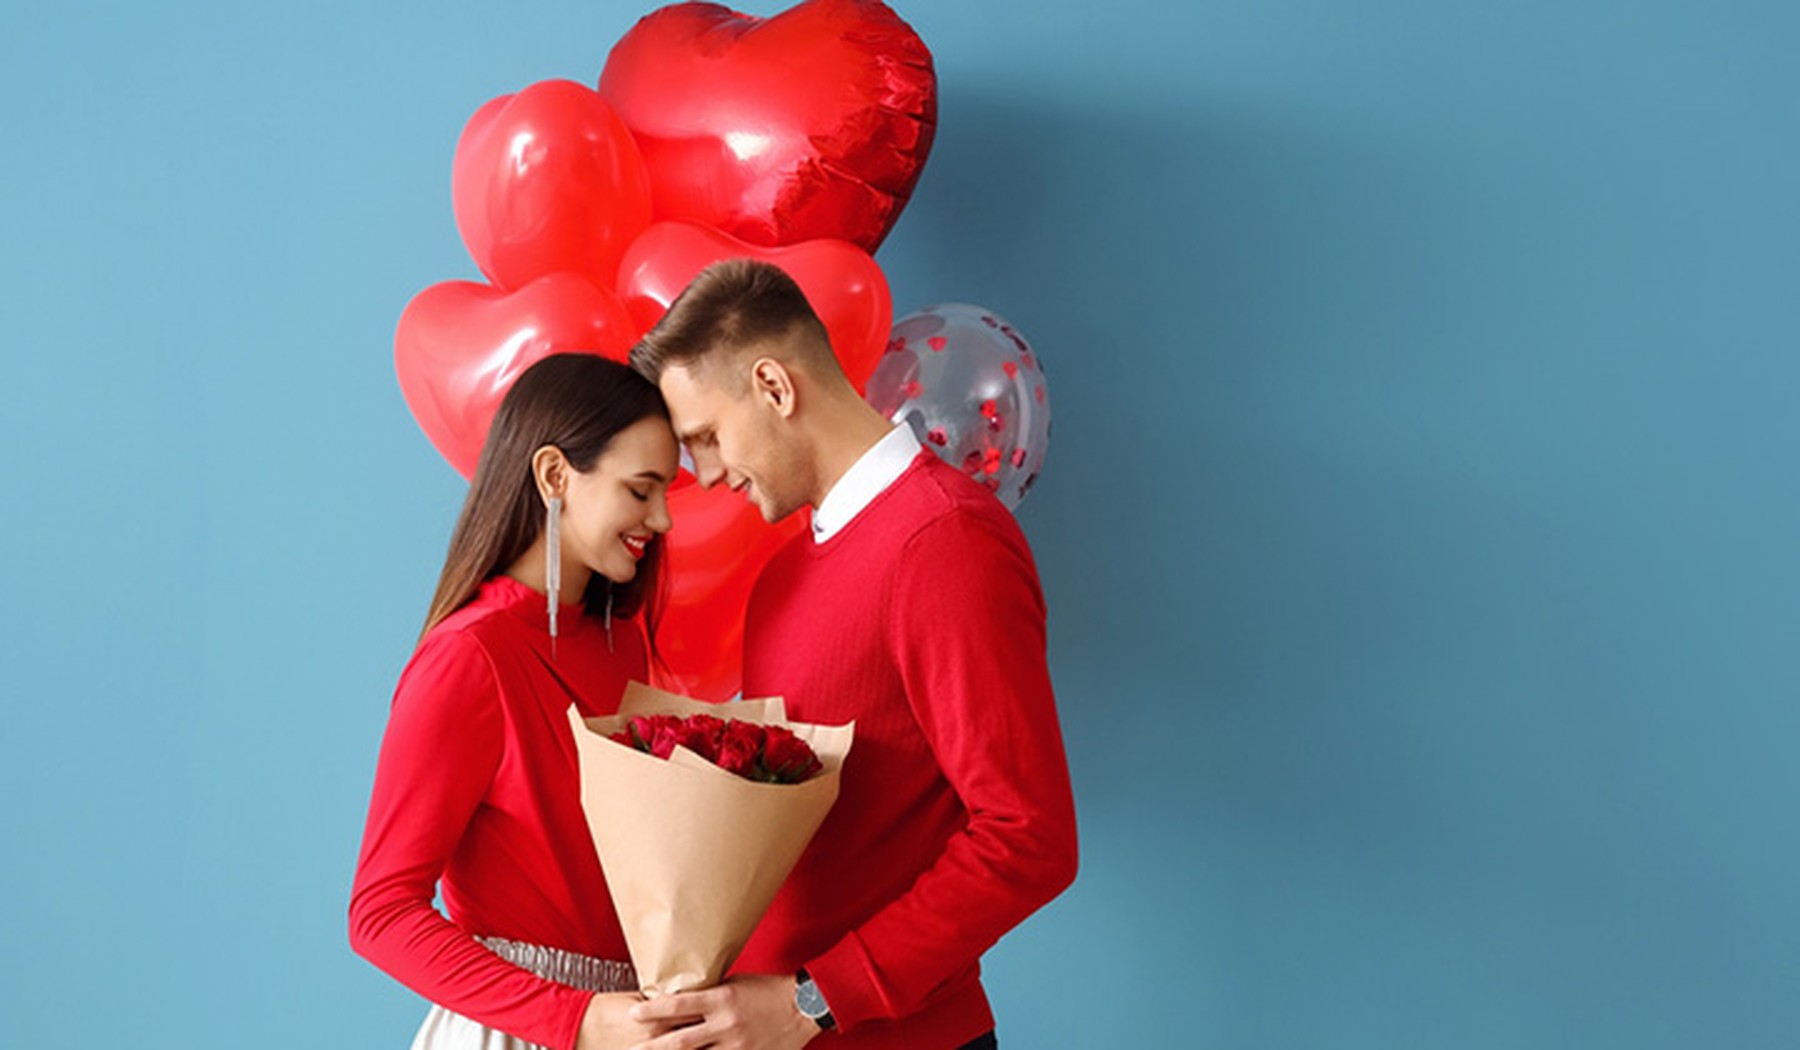 Young man and woman dressed in red in front of heart shaped balloons, holding red roses